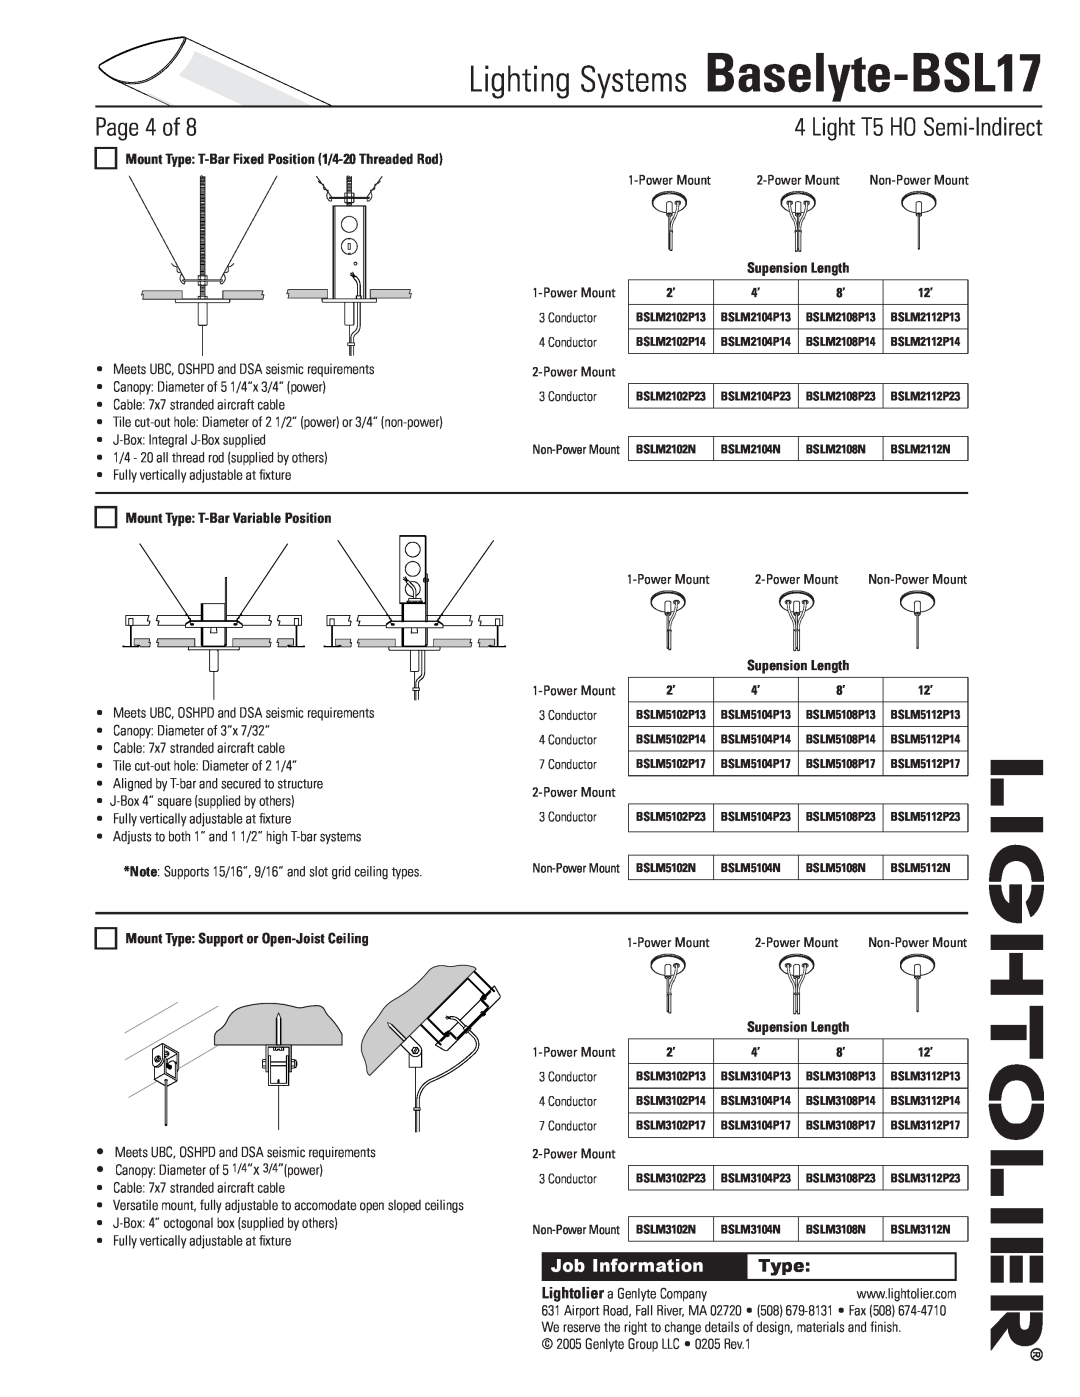 Lightolier Baselyte-BSL17 Page of, Mount Type T-BarVariable Position, Mount Type Support or Open-JoistCeiling 